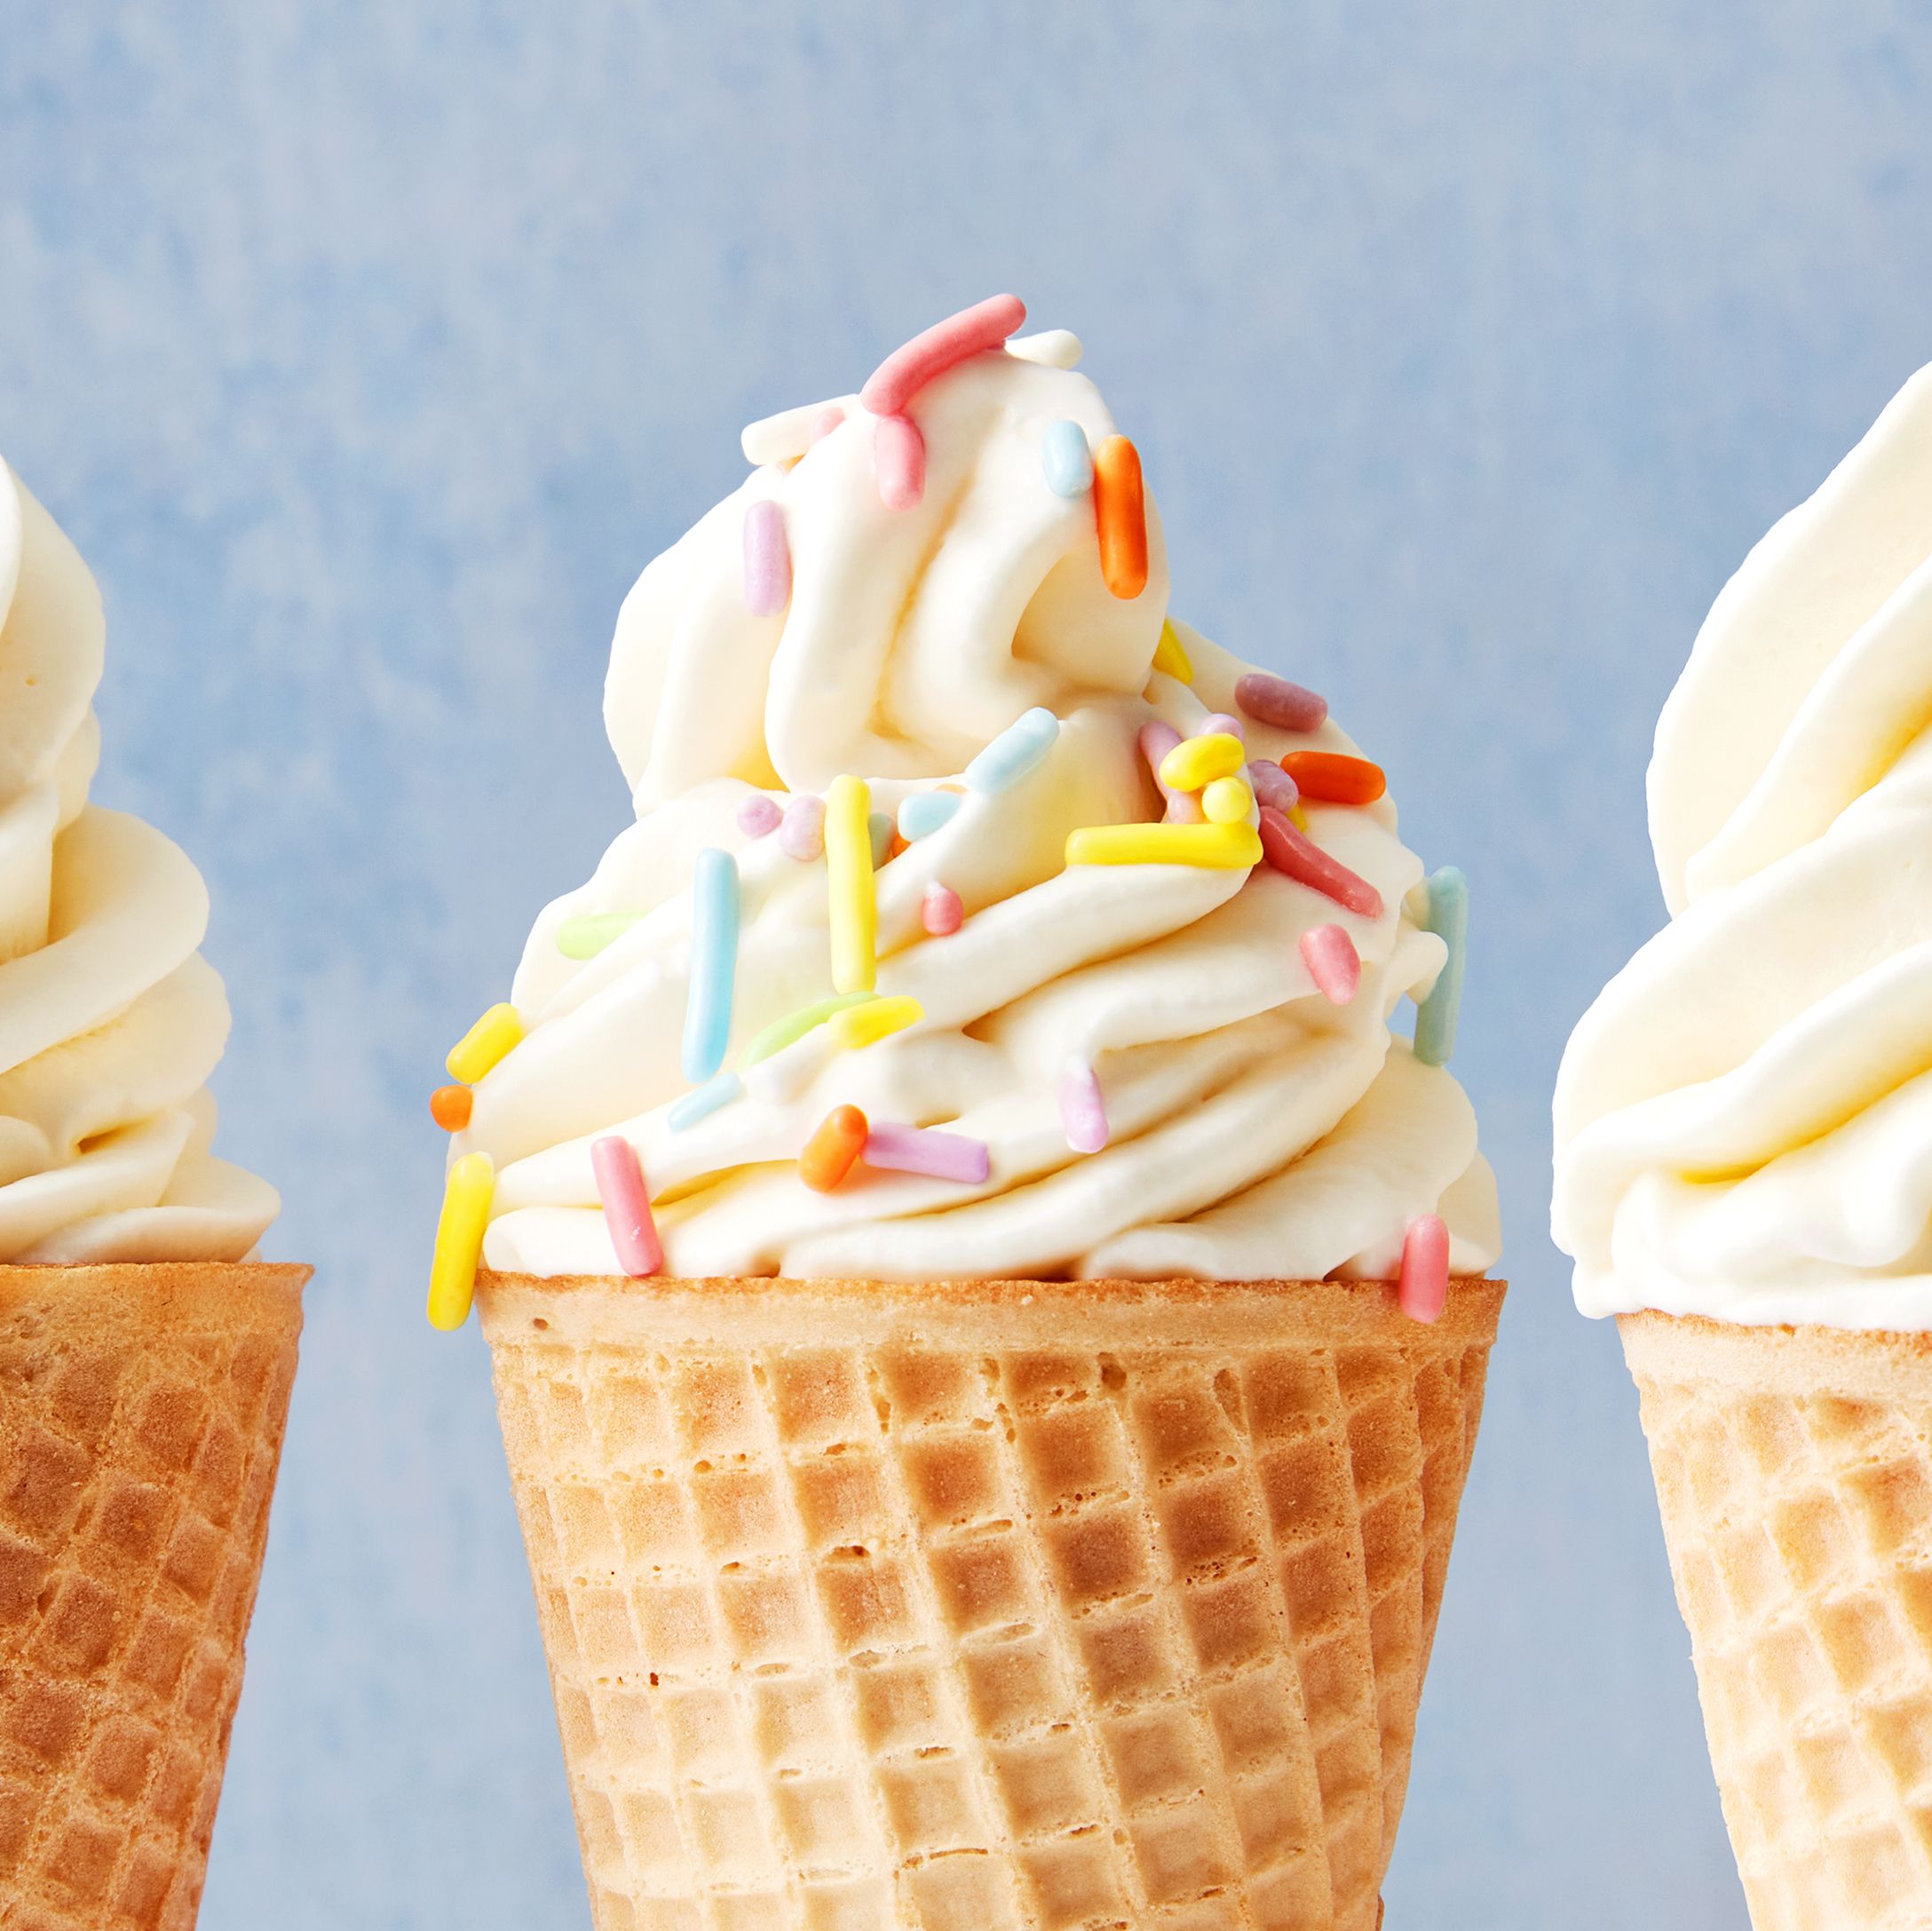 Homemade Soft Serve Ice Cream Will Have You Piping Cones All Summer